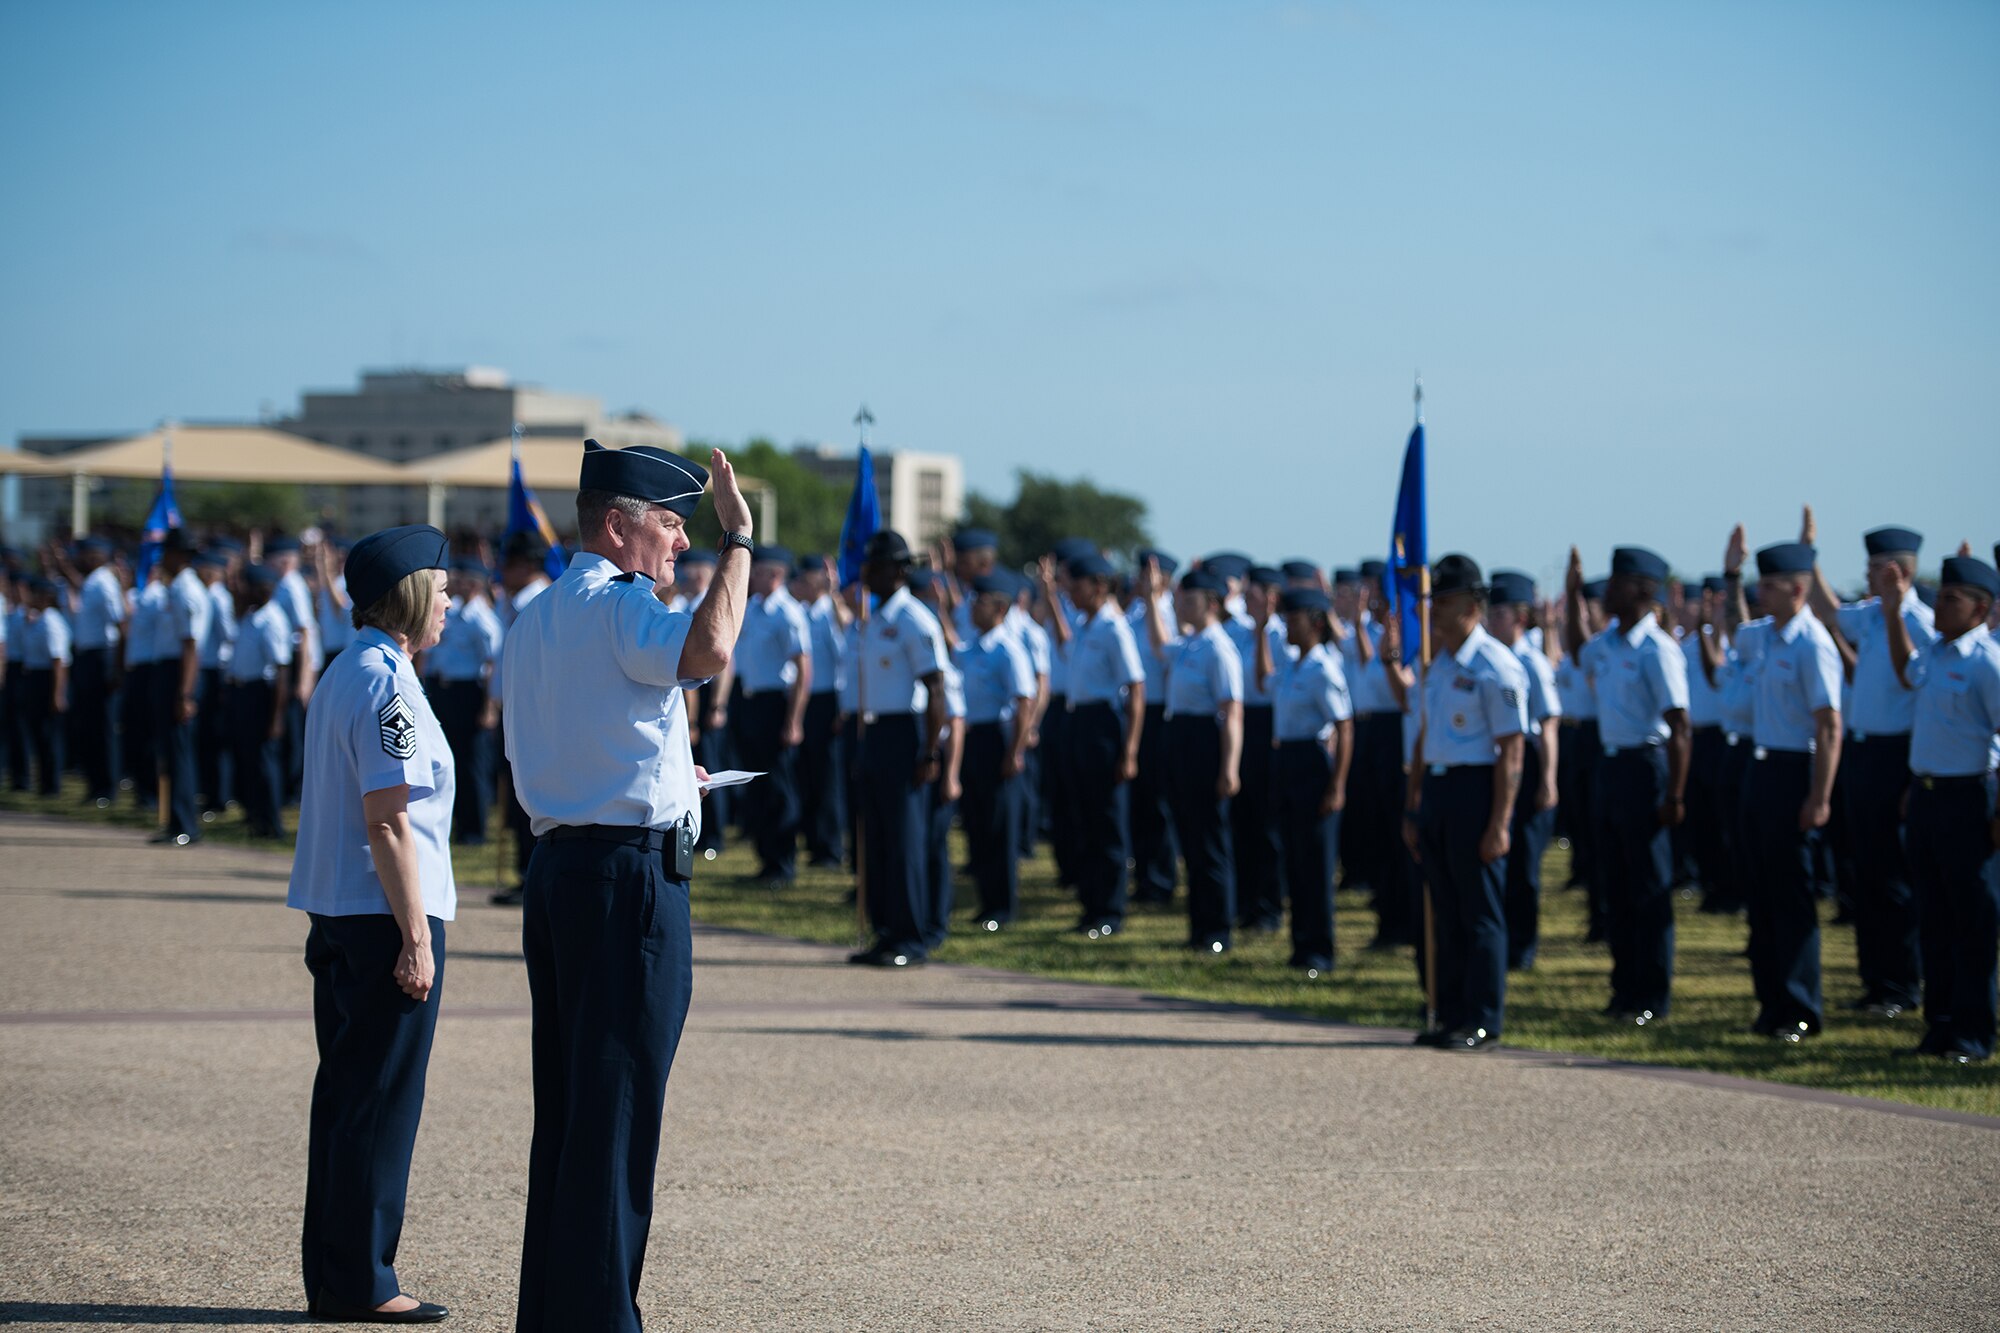 U.S. Air Force Lt. Gen. Brad Webb (right), commander of Air Education and Training Command (AETC), gives the oath of enlistment to graduating Airmen Aug. 2, 2019, at Joint Base San Antonio-Lackland, Texas.